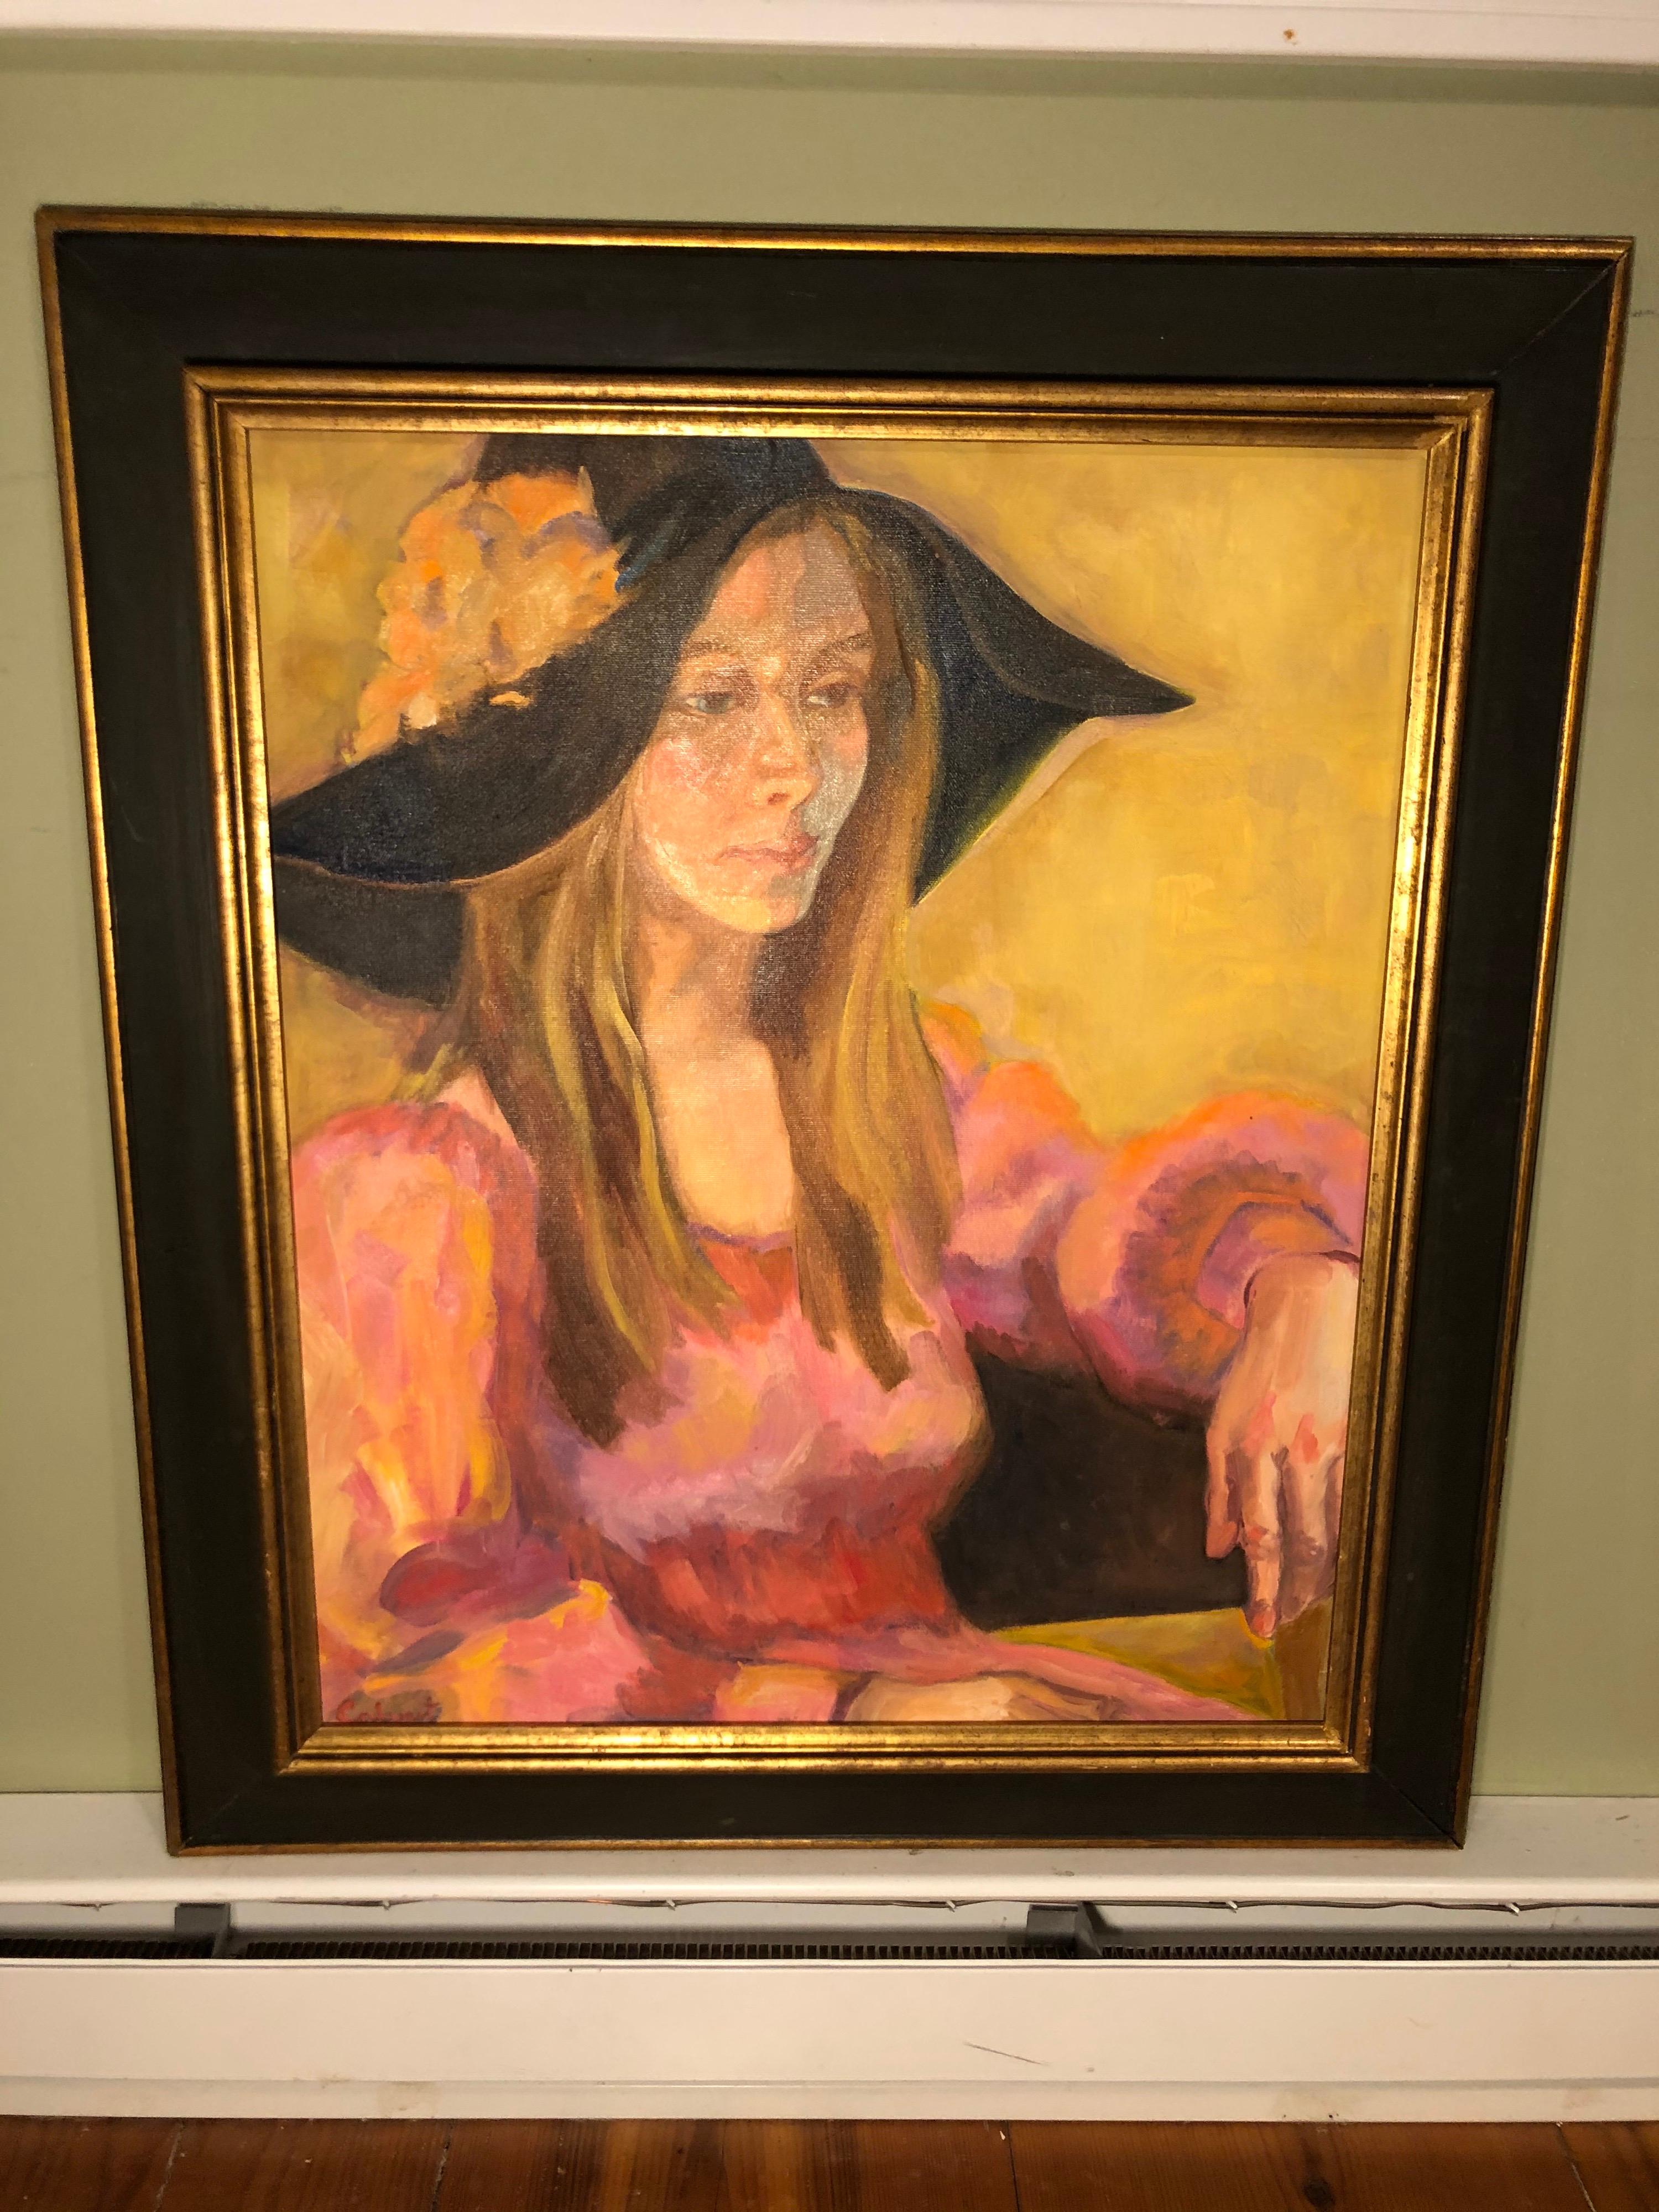 1977 Joni Mitchell Style Portrait Signed Peggy Calvart. Oil on canvas. The artist subject looks very much like Joni Mitchell, the folk singer.
1970's style with the hat and clothing. Housed in a dramatic black and gold frame.